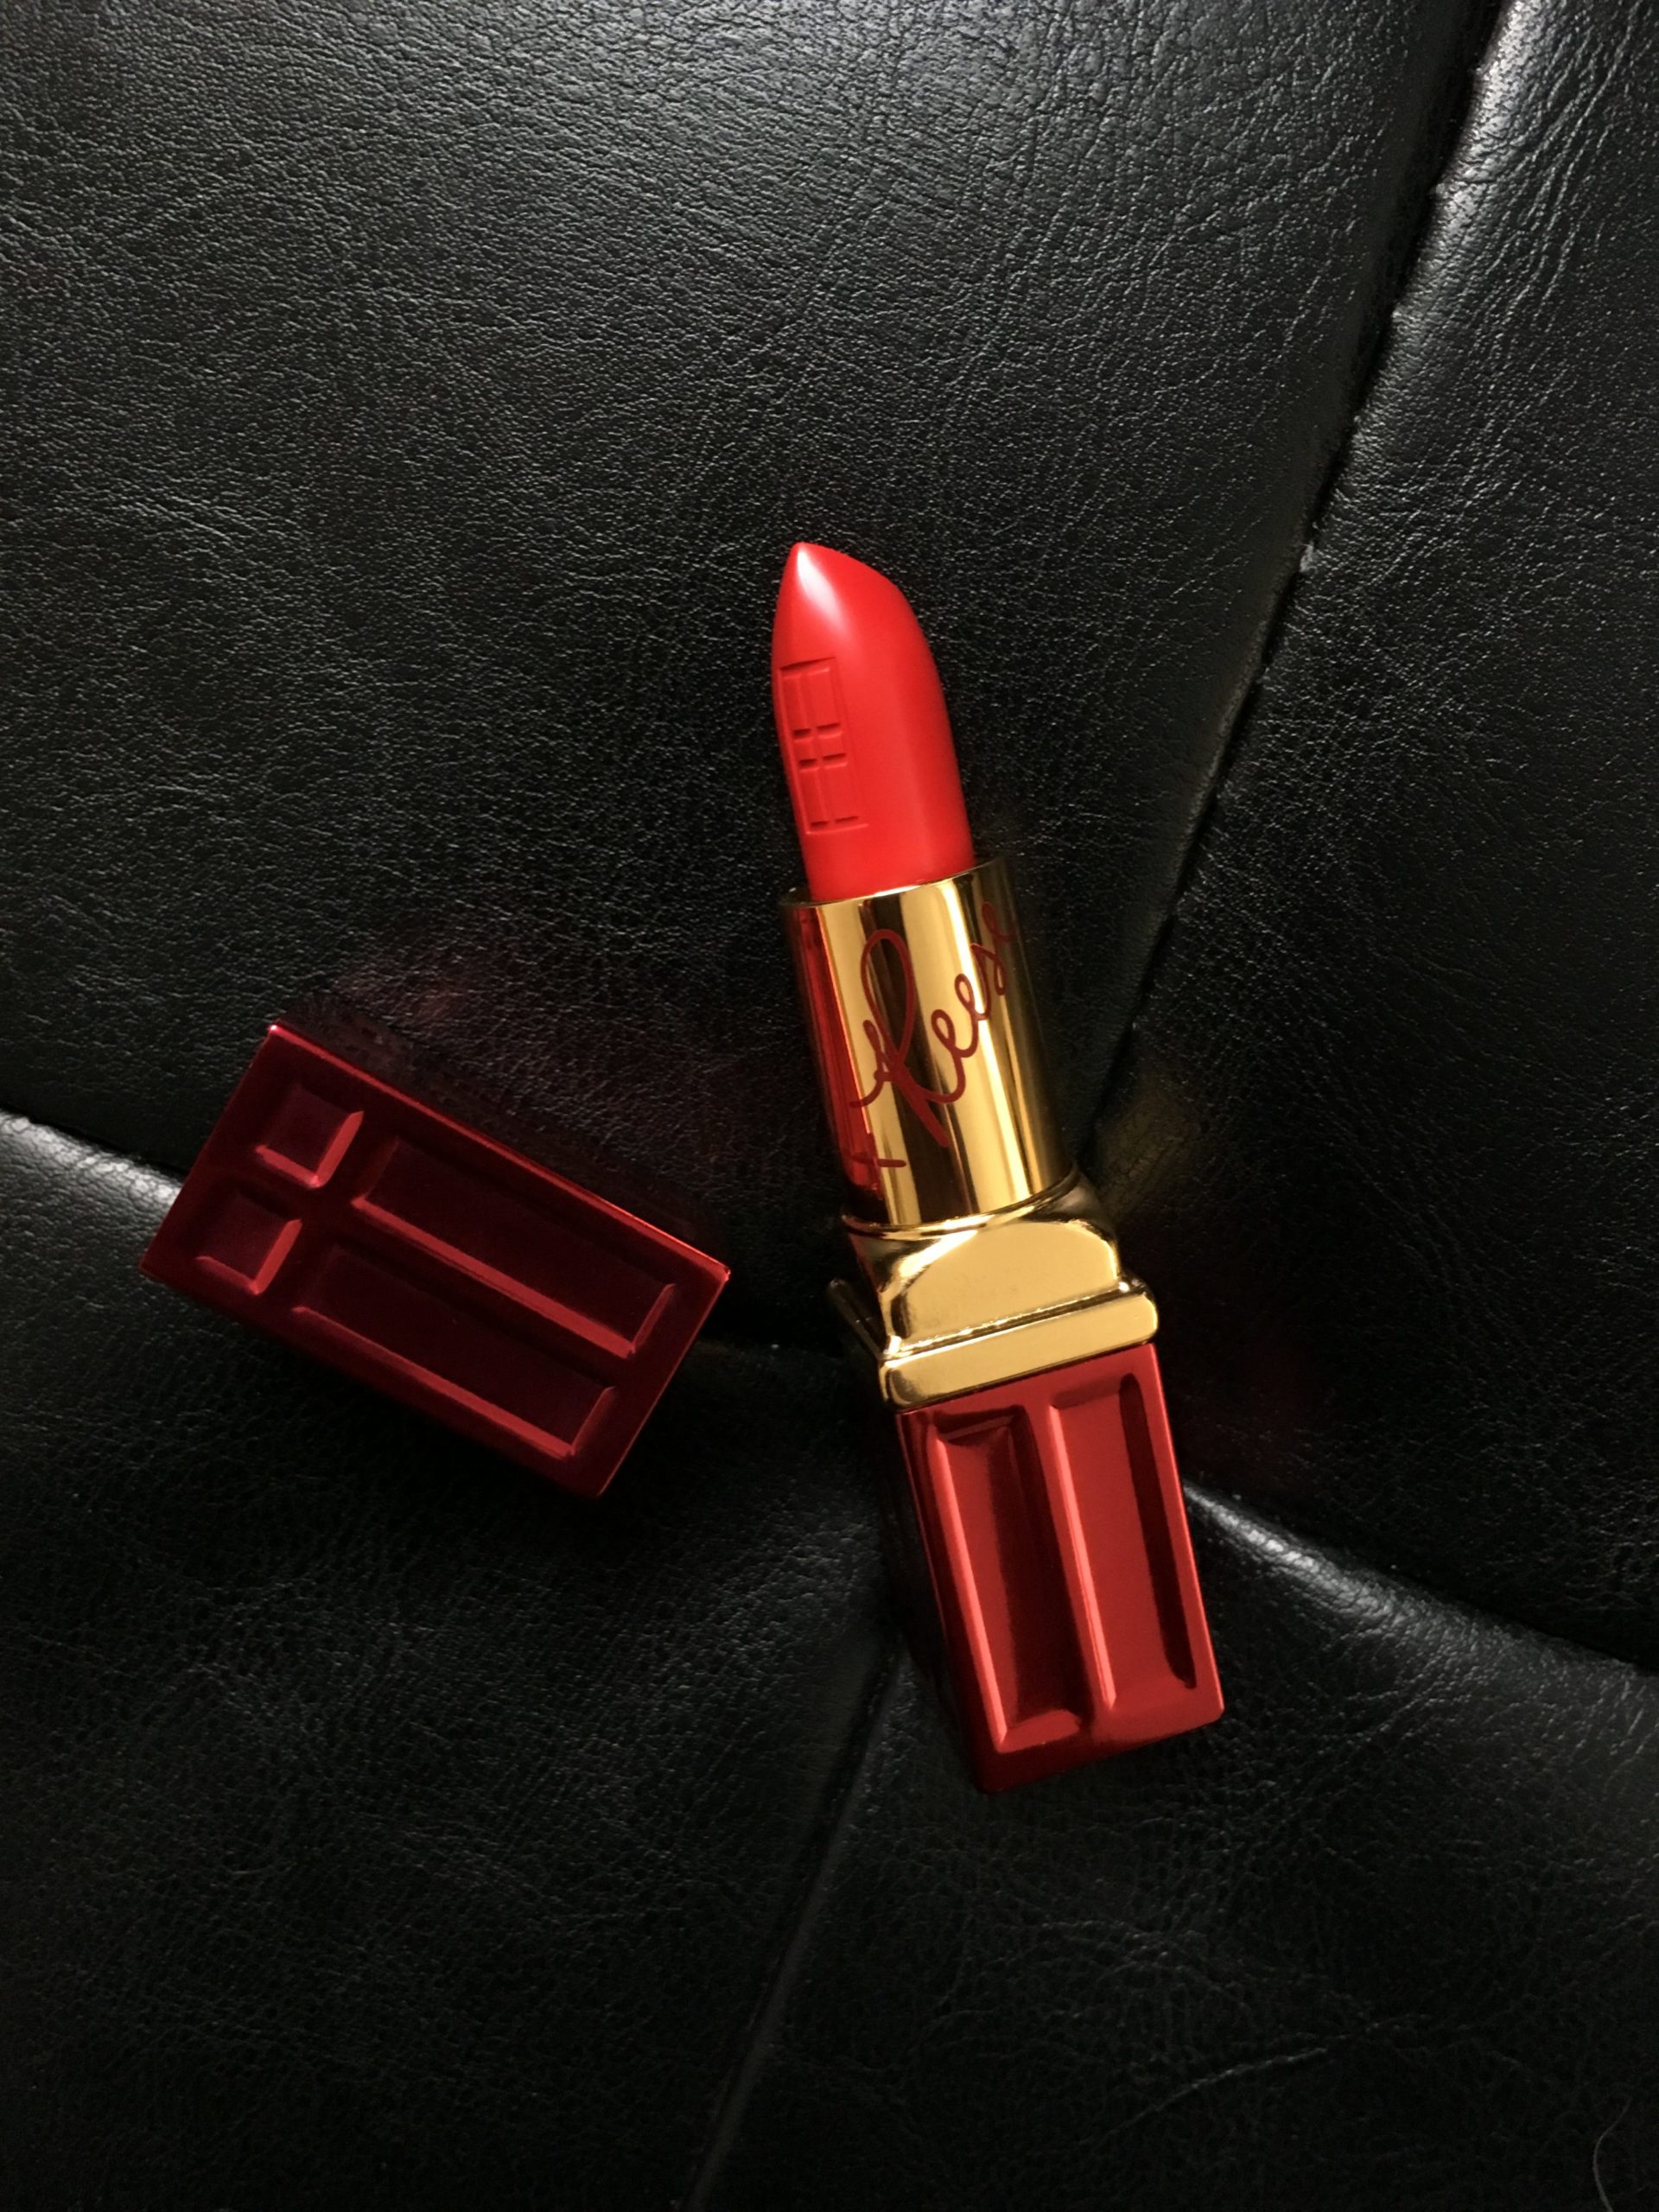 Colonial Forfærde Peck Review, Swatches, Photos, Makeup Trends 2018, 2019, 2020: Best Red Lipstick,  Elizabeth Arden, Reese Witherspoon, Limited Edition Red Door Red  Moisturizing Lipstick | BeautyStat.com